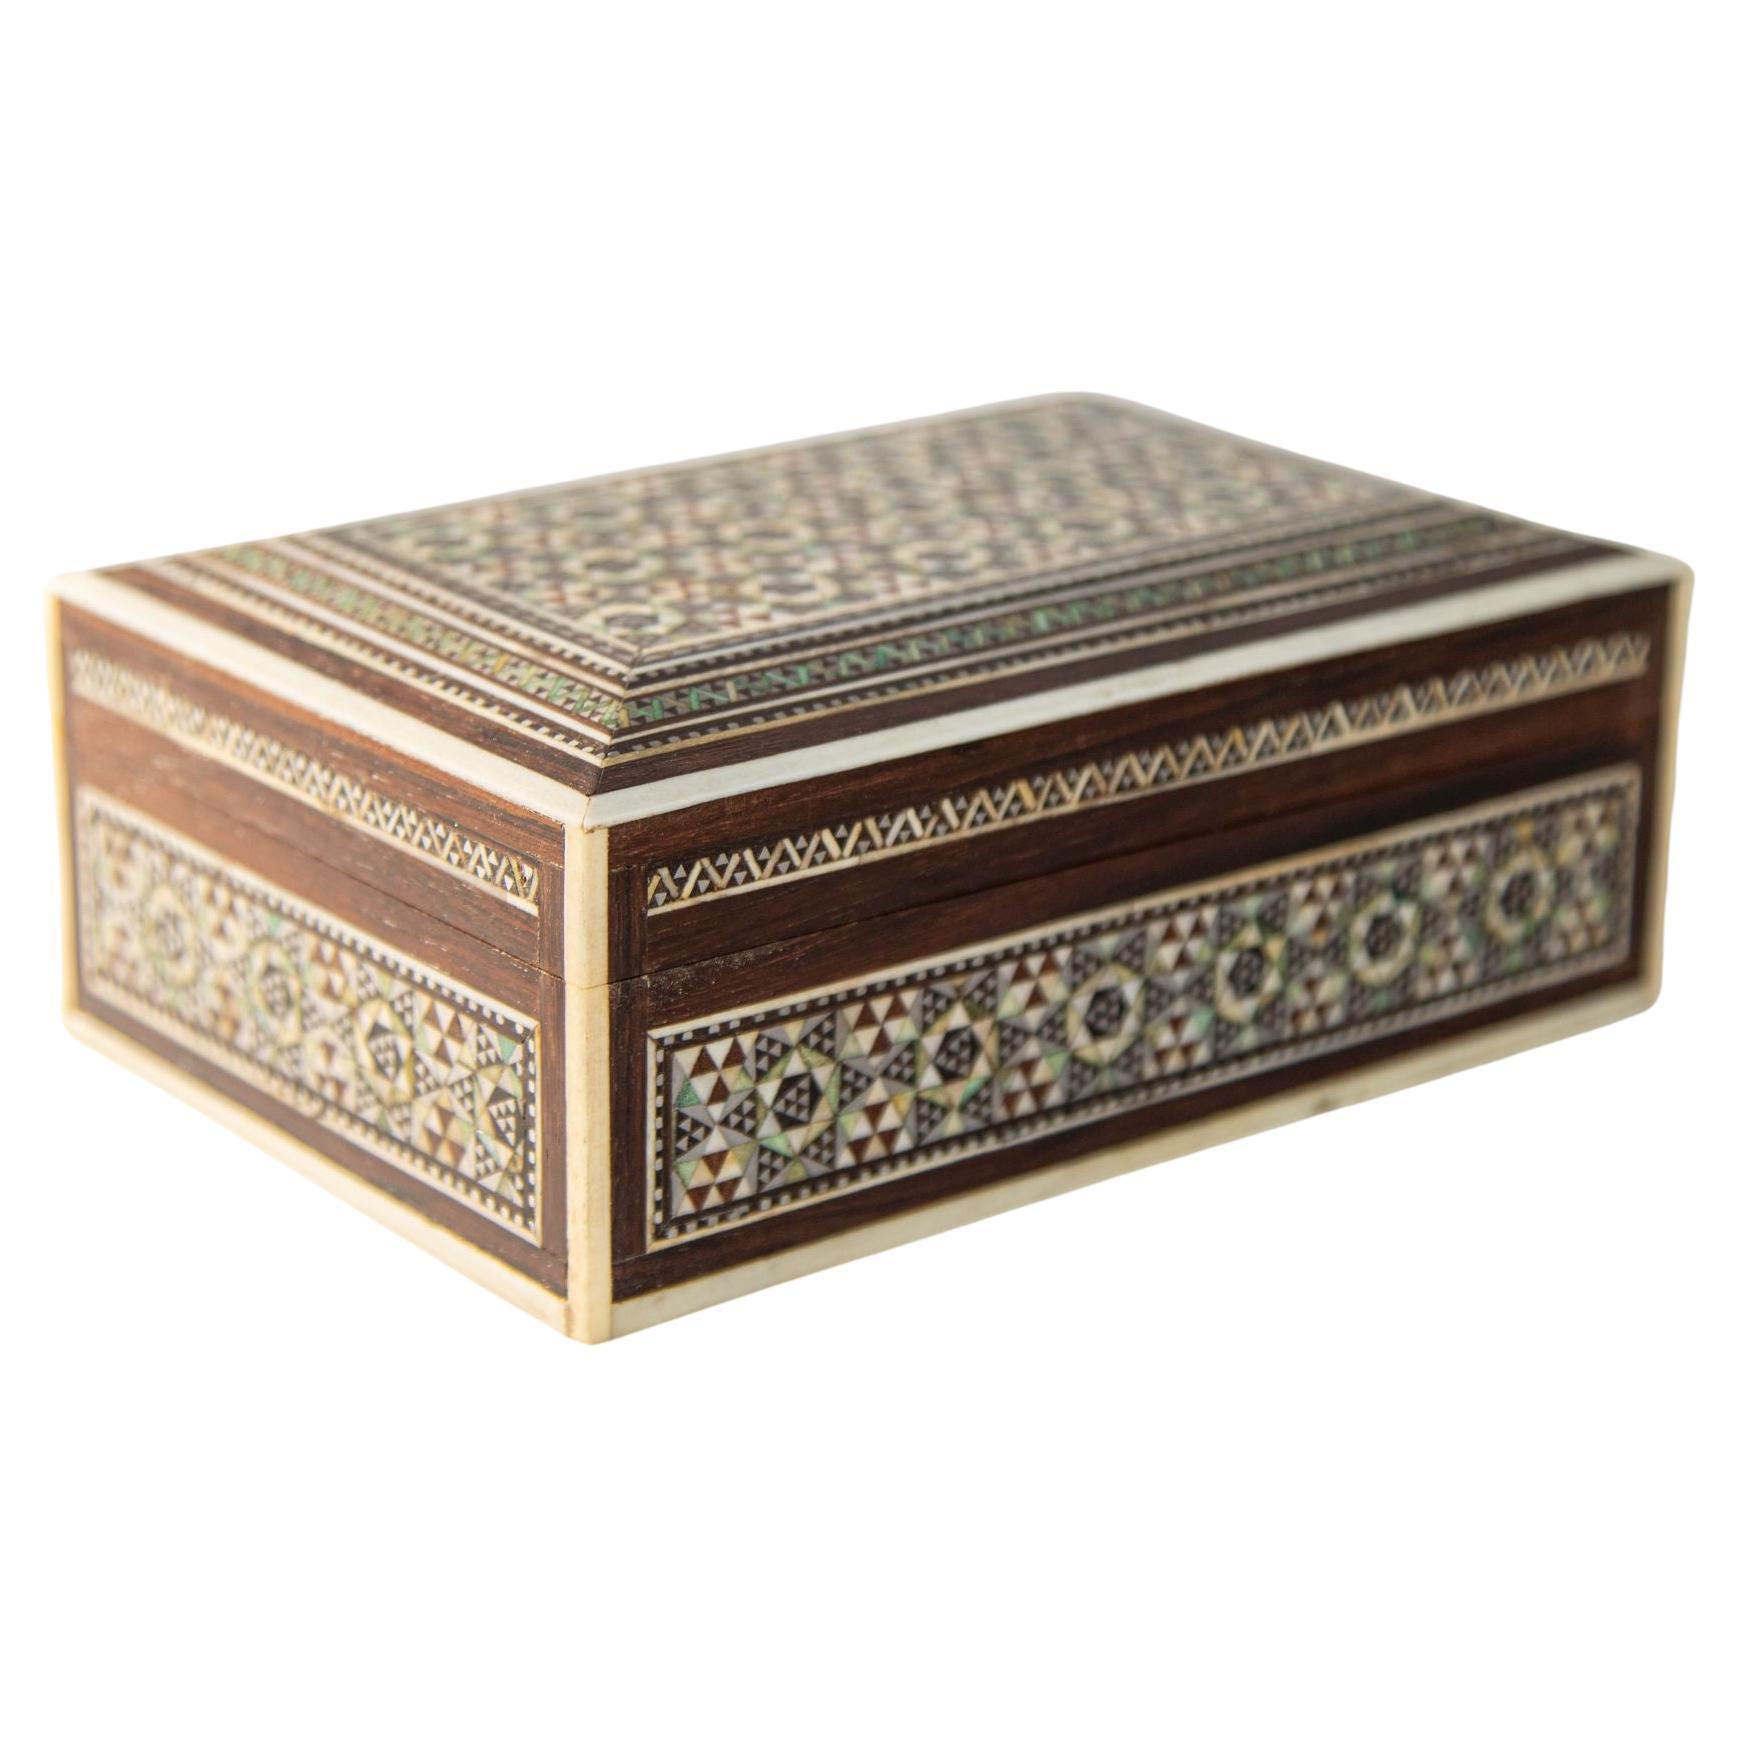 1940s Mother of Pearl Inlaid Decorative Middle Eastern Islamic Box For Sale